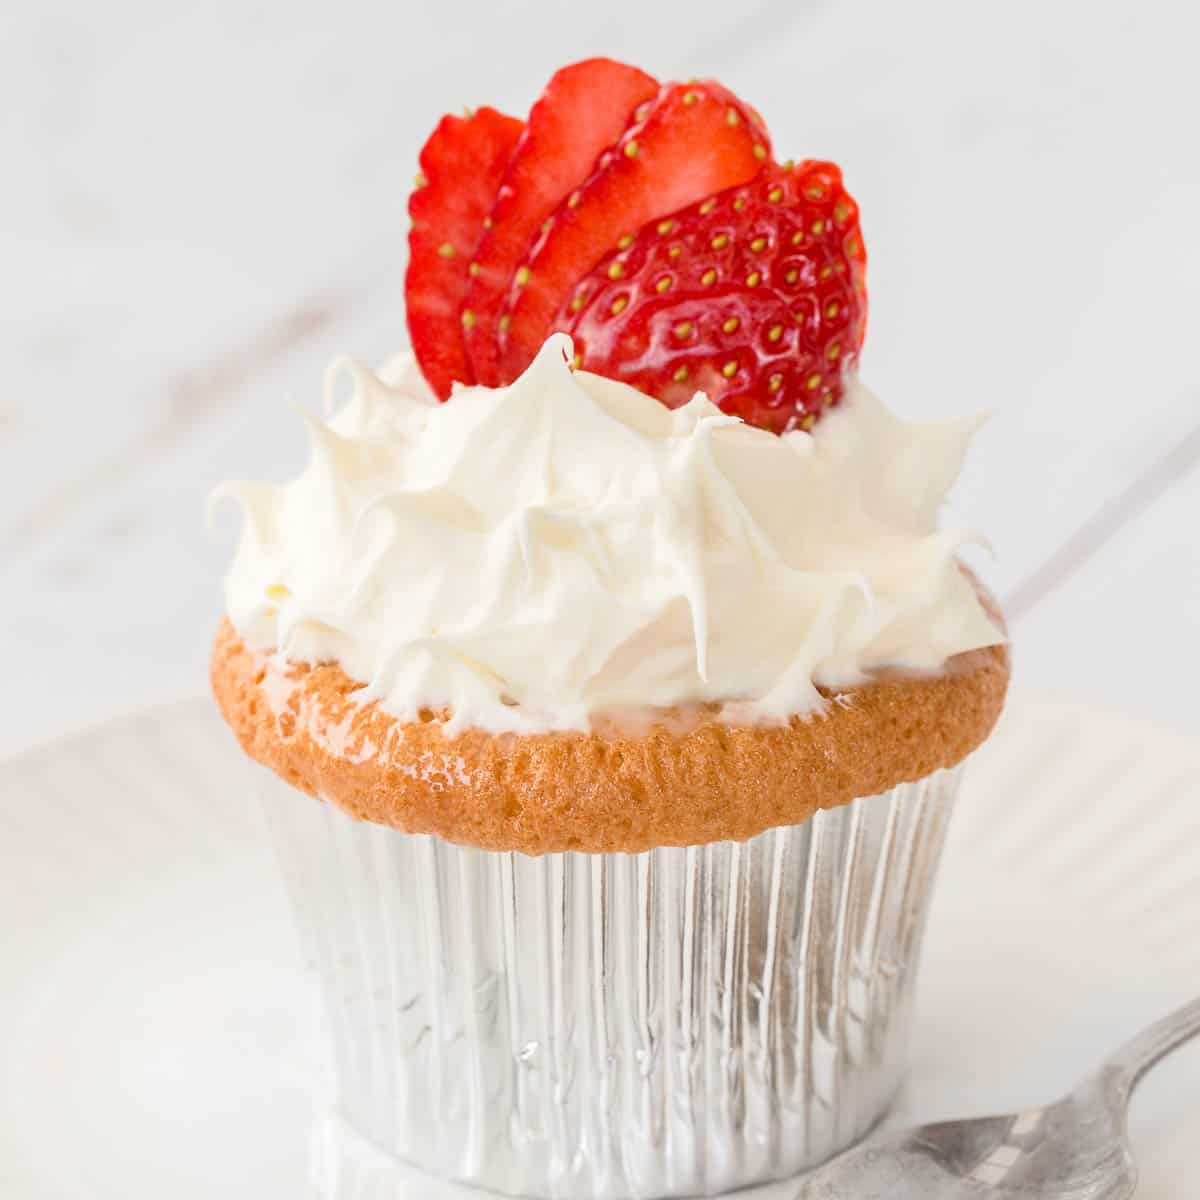 A baked cupcake in a foil patty pan, topped with whipped cream and strawberries